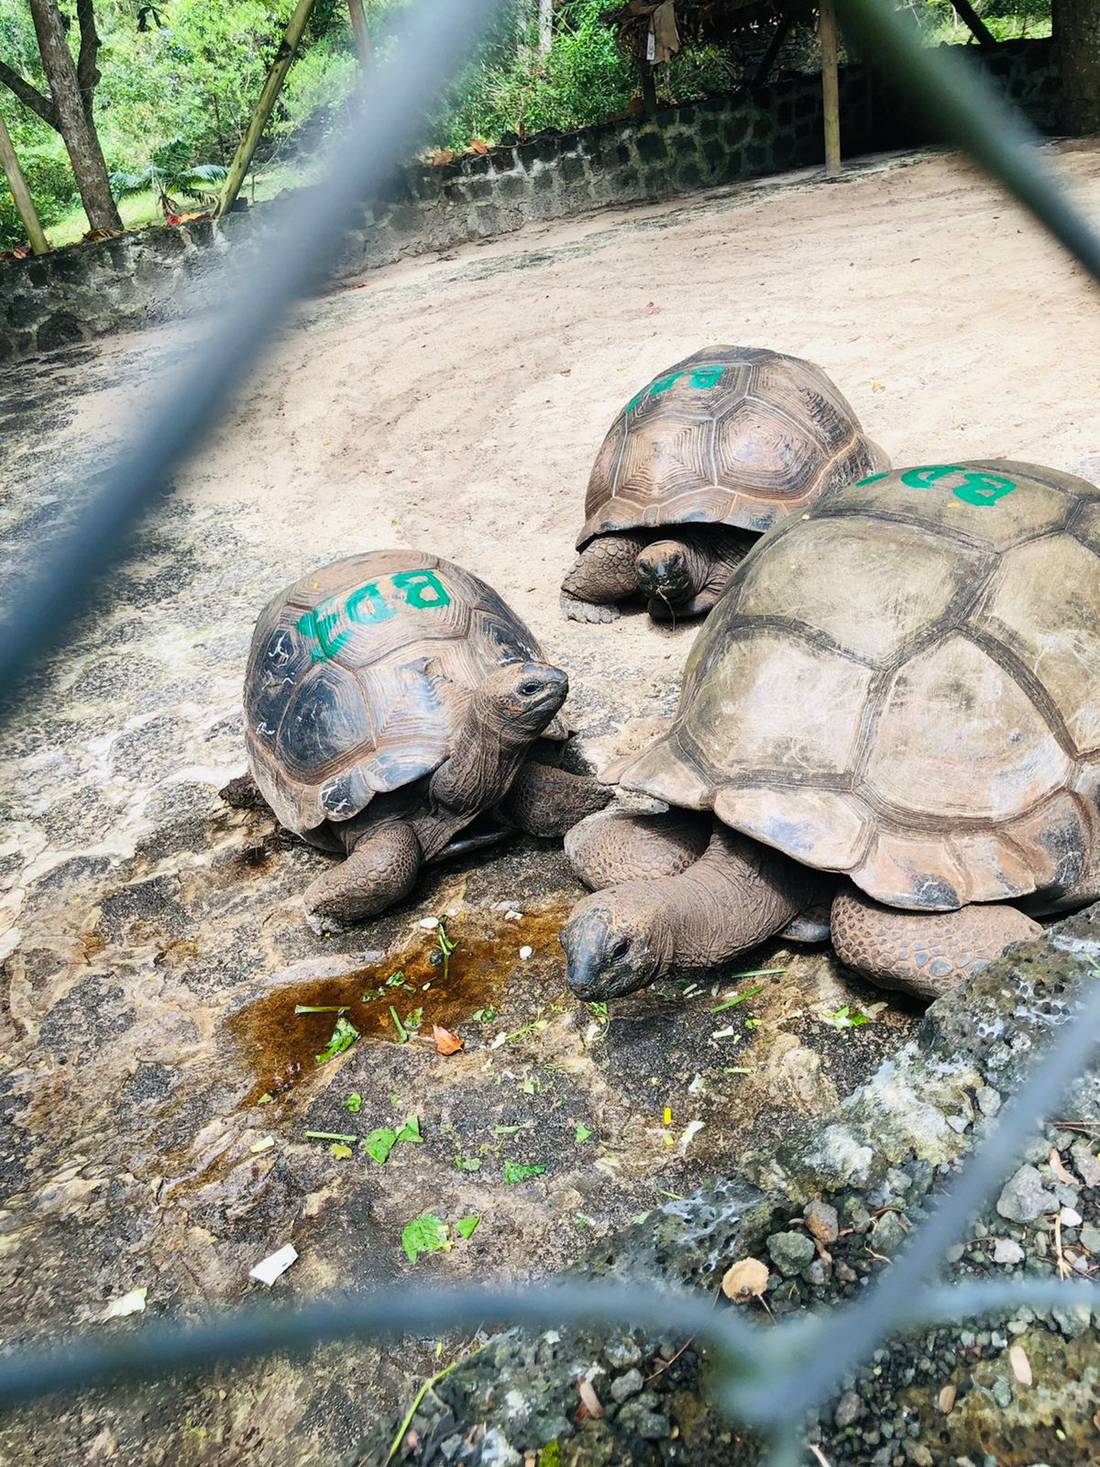 Yup, you can get to see some tortoises too!